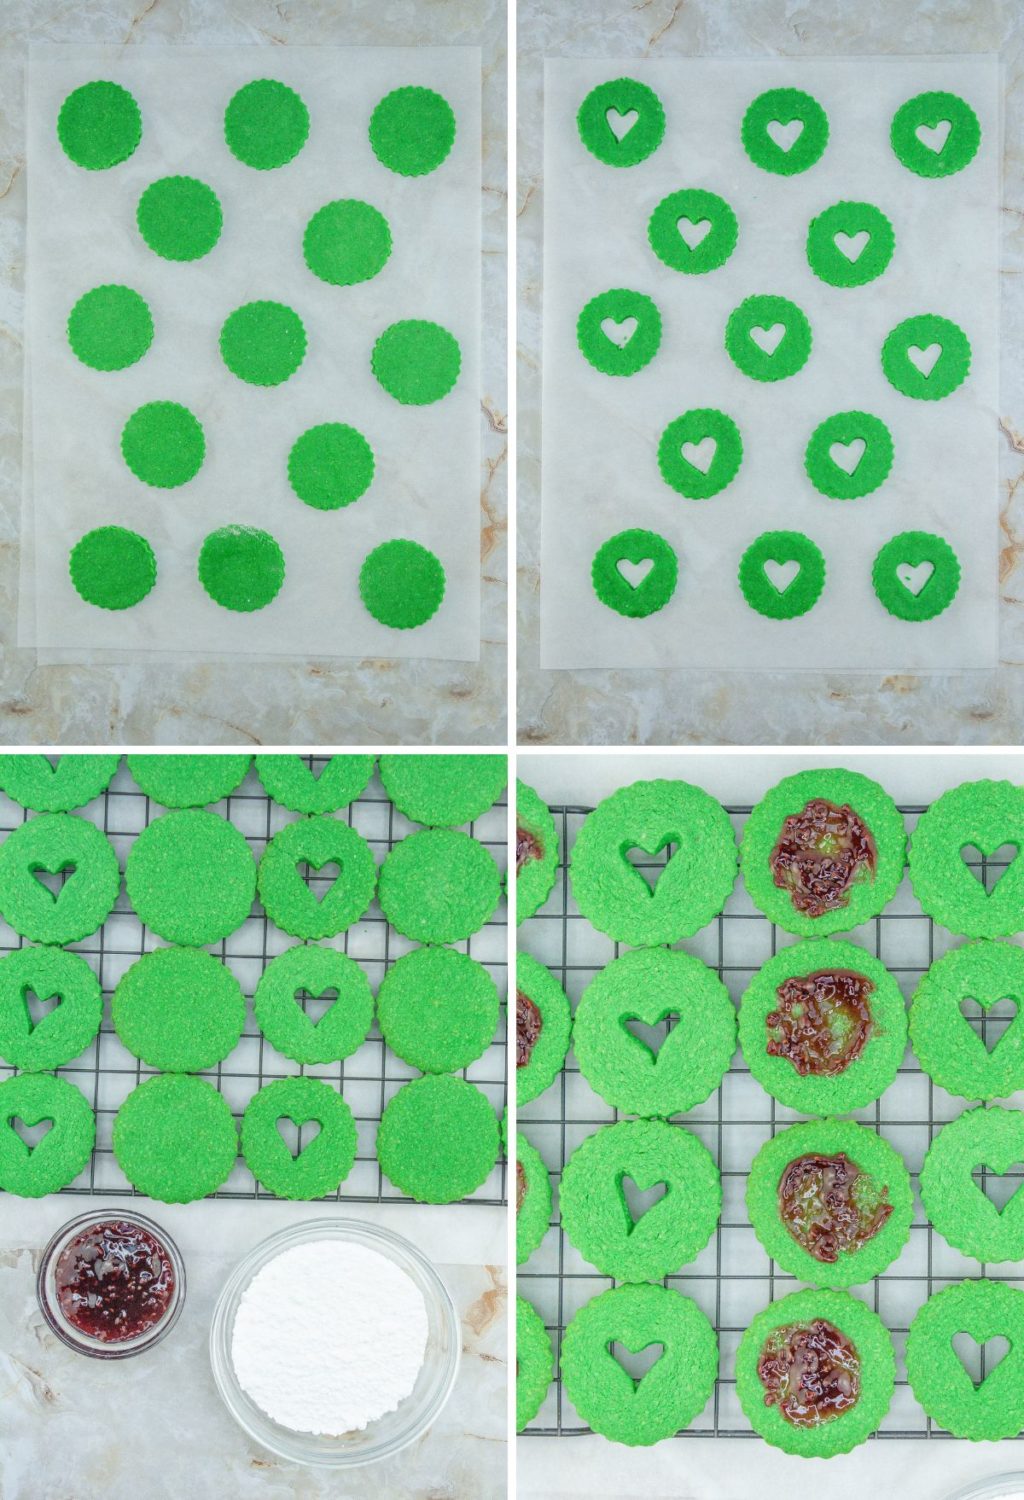 A series of pictures showing how to make green cookies.